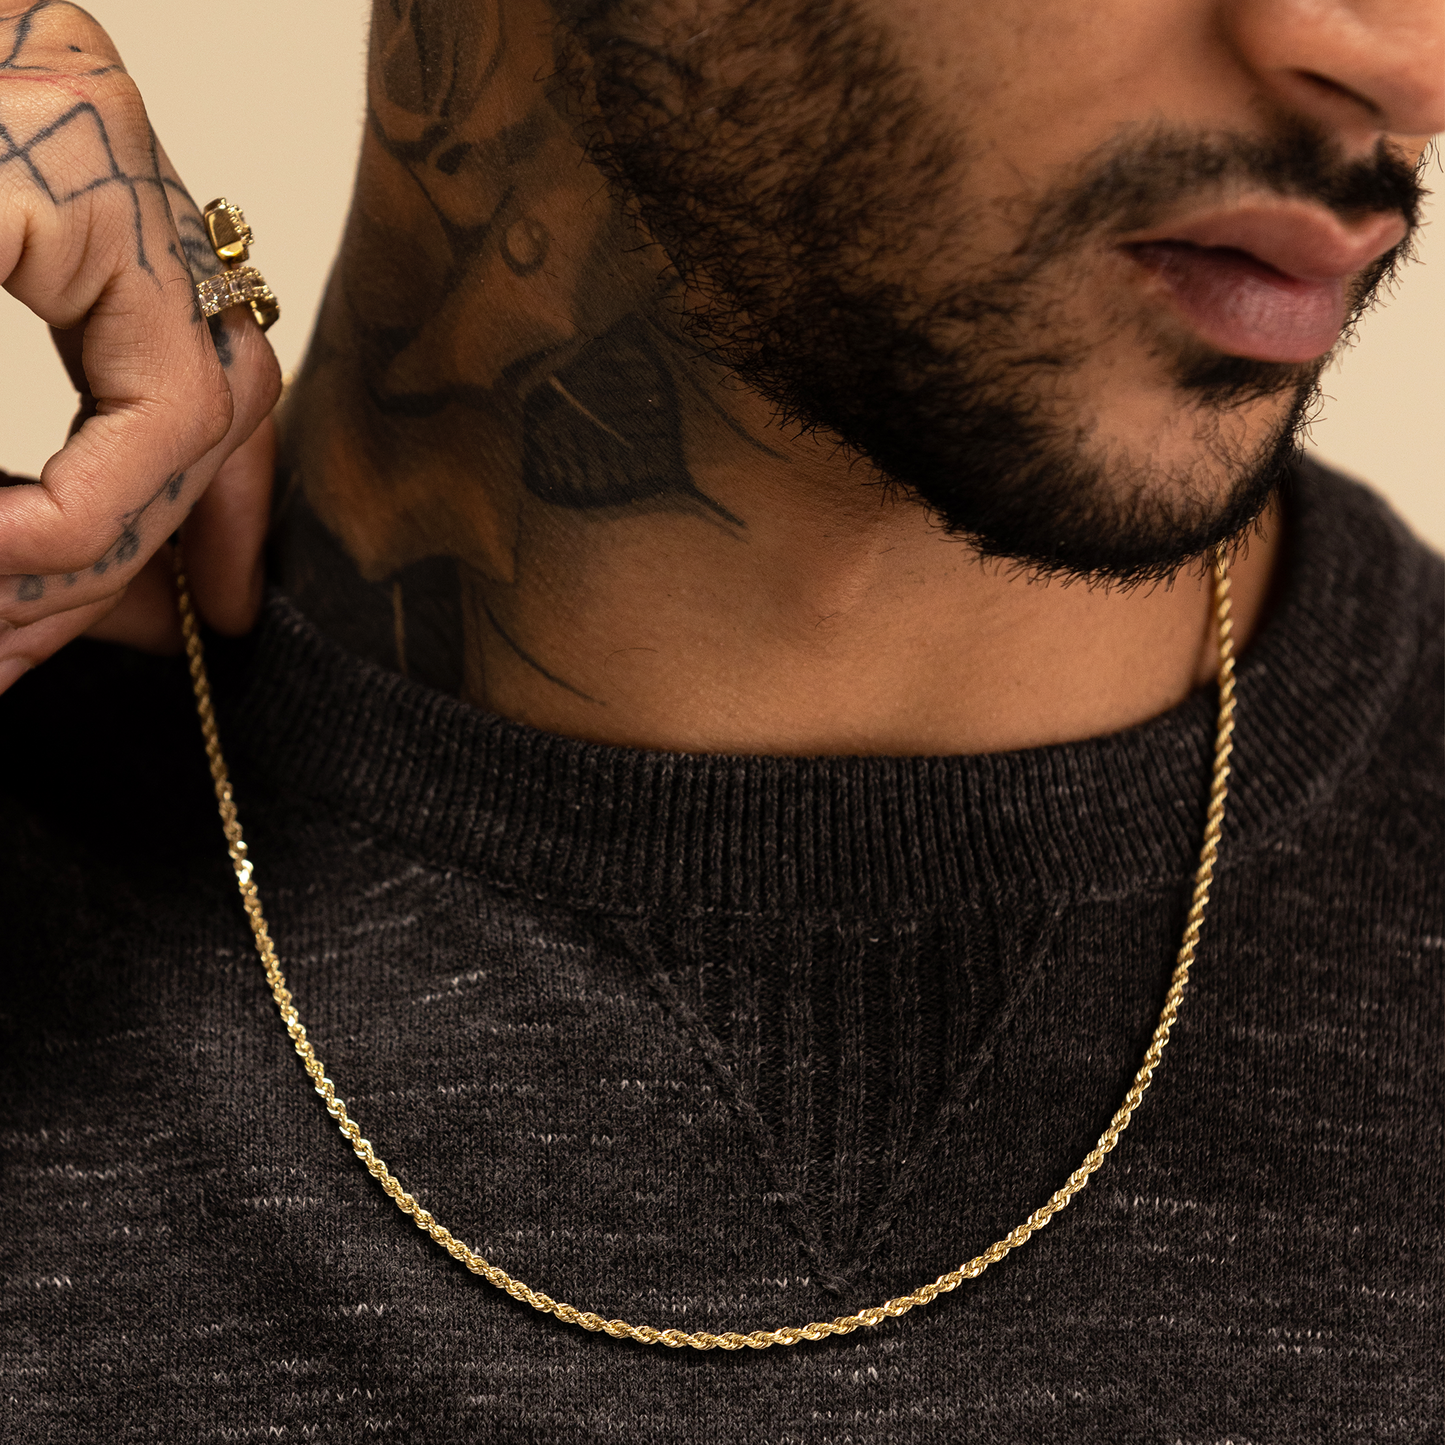 2.5mm Solid Gold Rope Chain